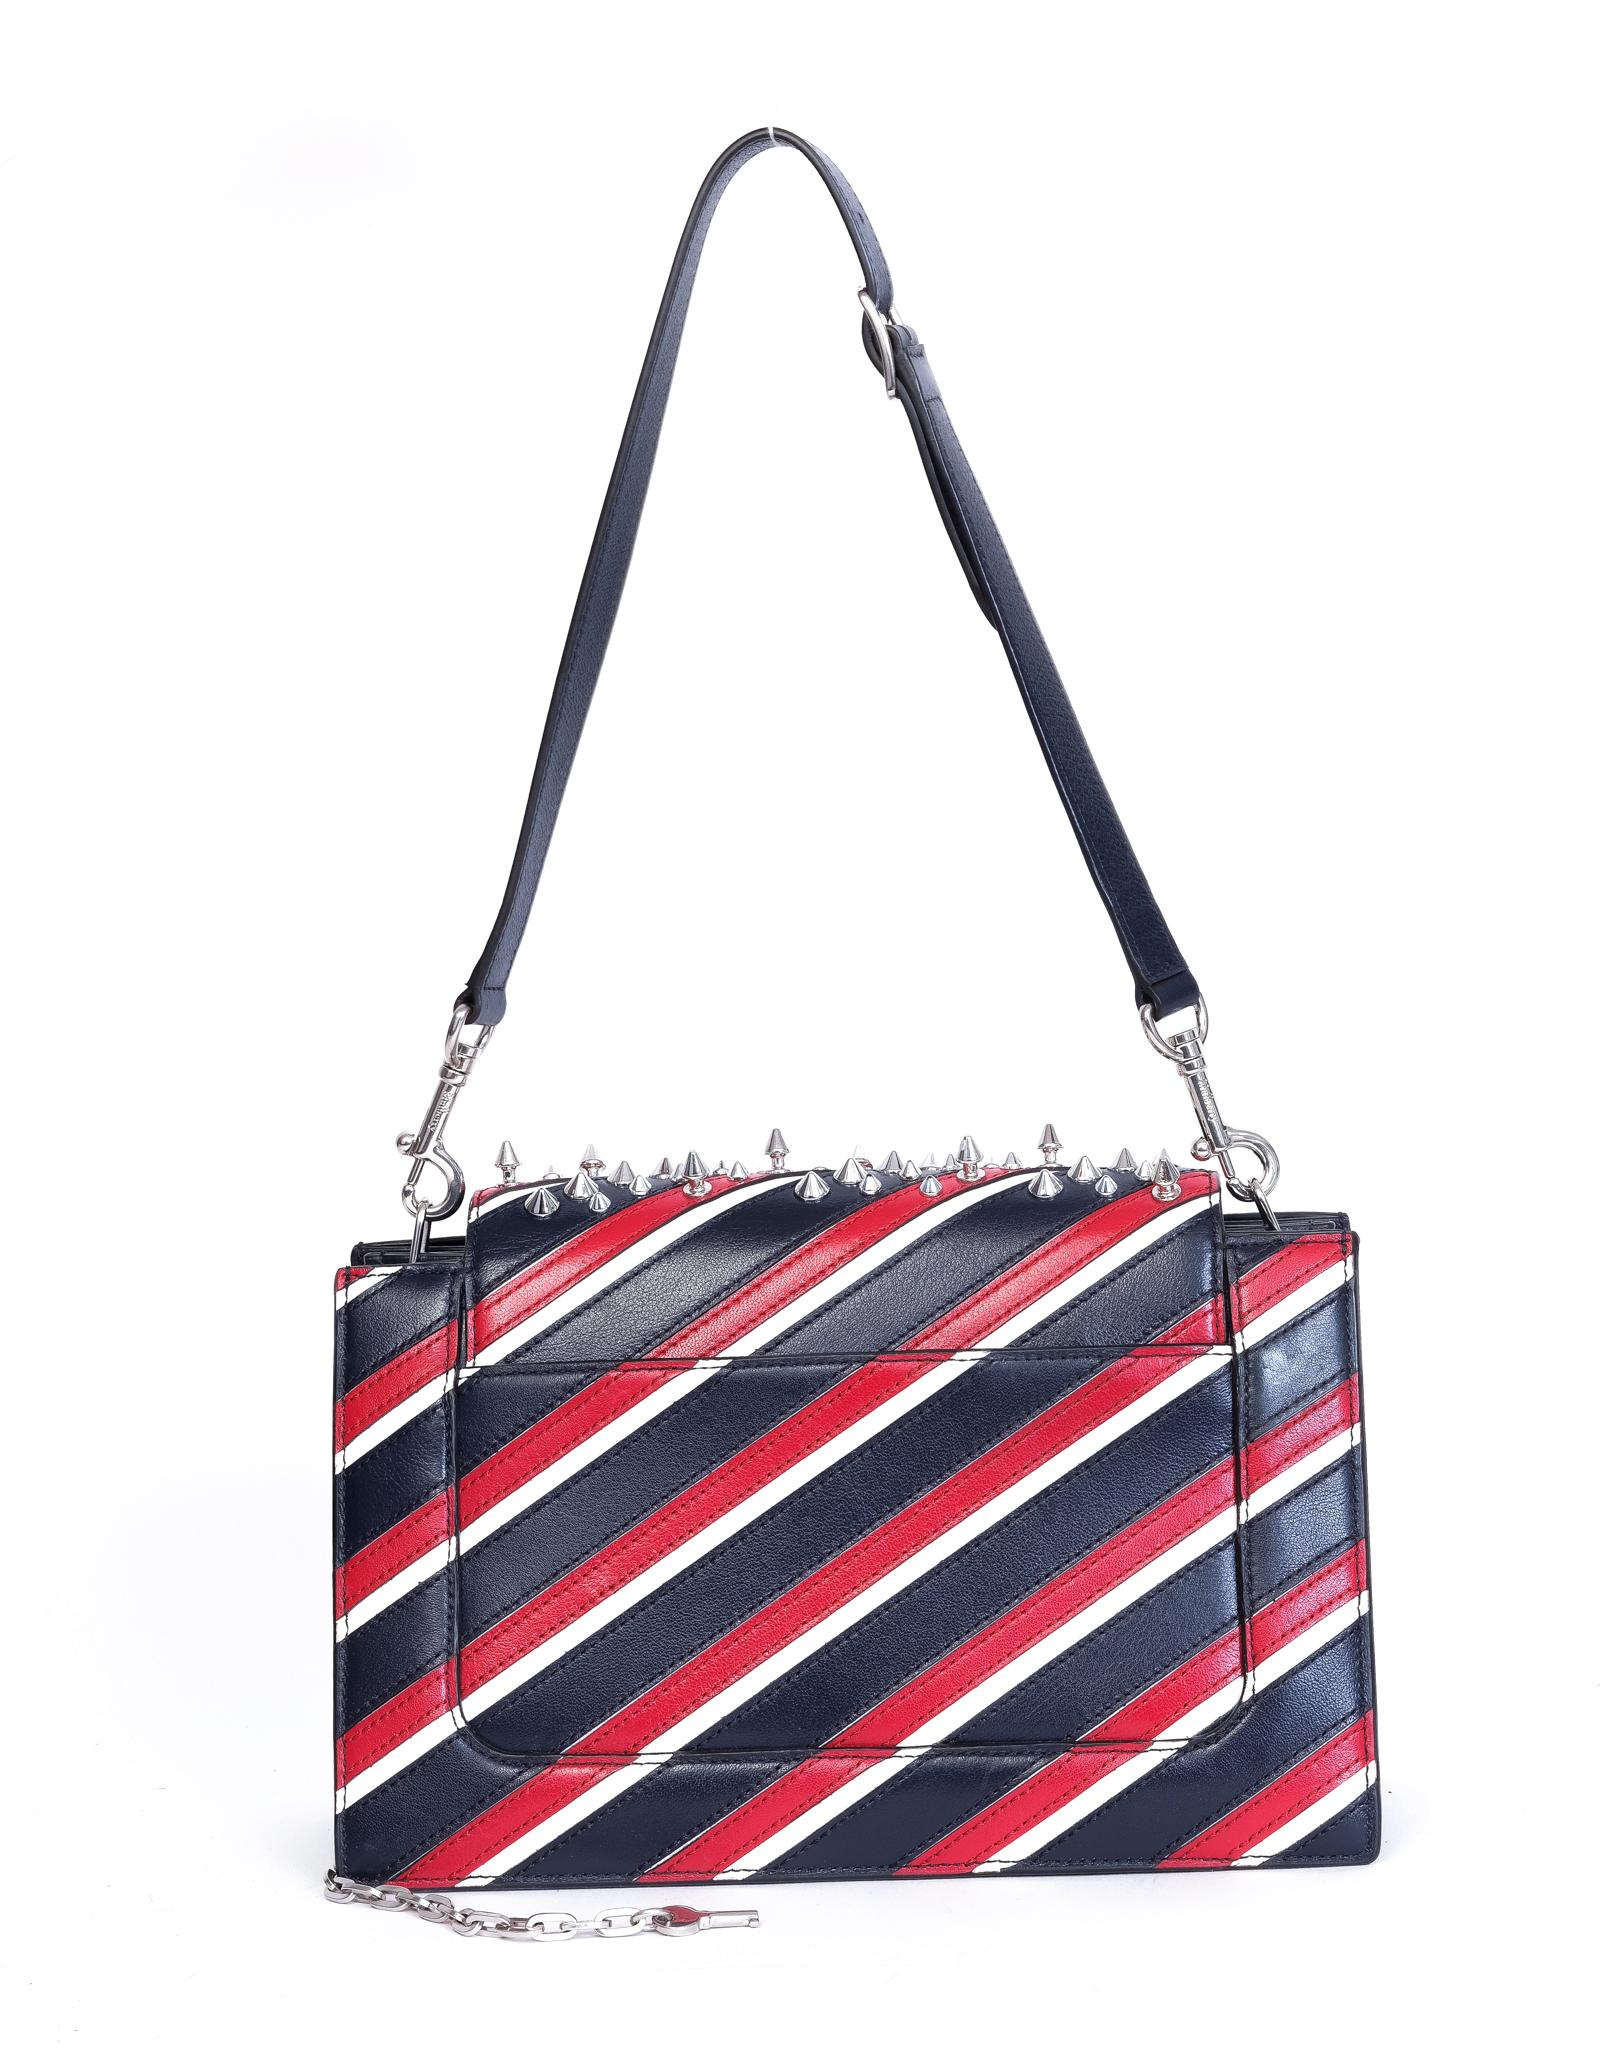 Leather bag from Mulberry with navy, red and white stripes with silver-tone studs and silver-tone hardware.

COLOR: Red, white, navy with sliver spikes
ITEM CODE: MAC
MATERIAL: Leather
MEASURES: H 7” x L 11 ” x D 5”
EST. RETAIL: $3000
COMES WITH: